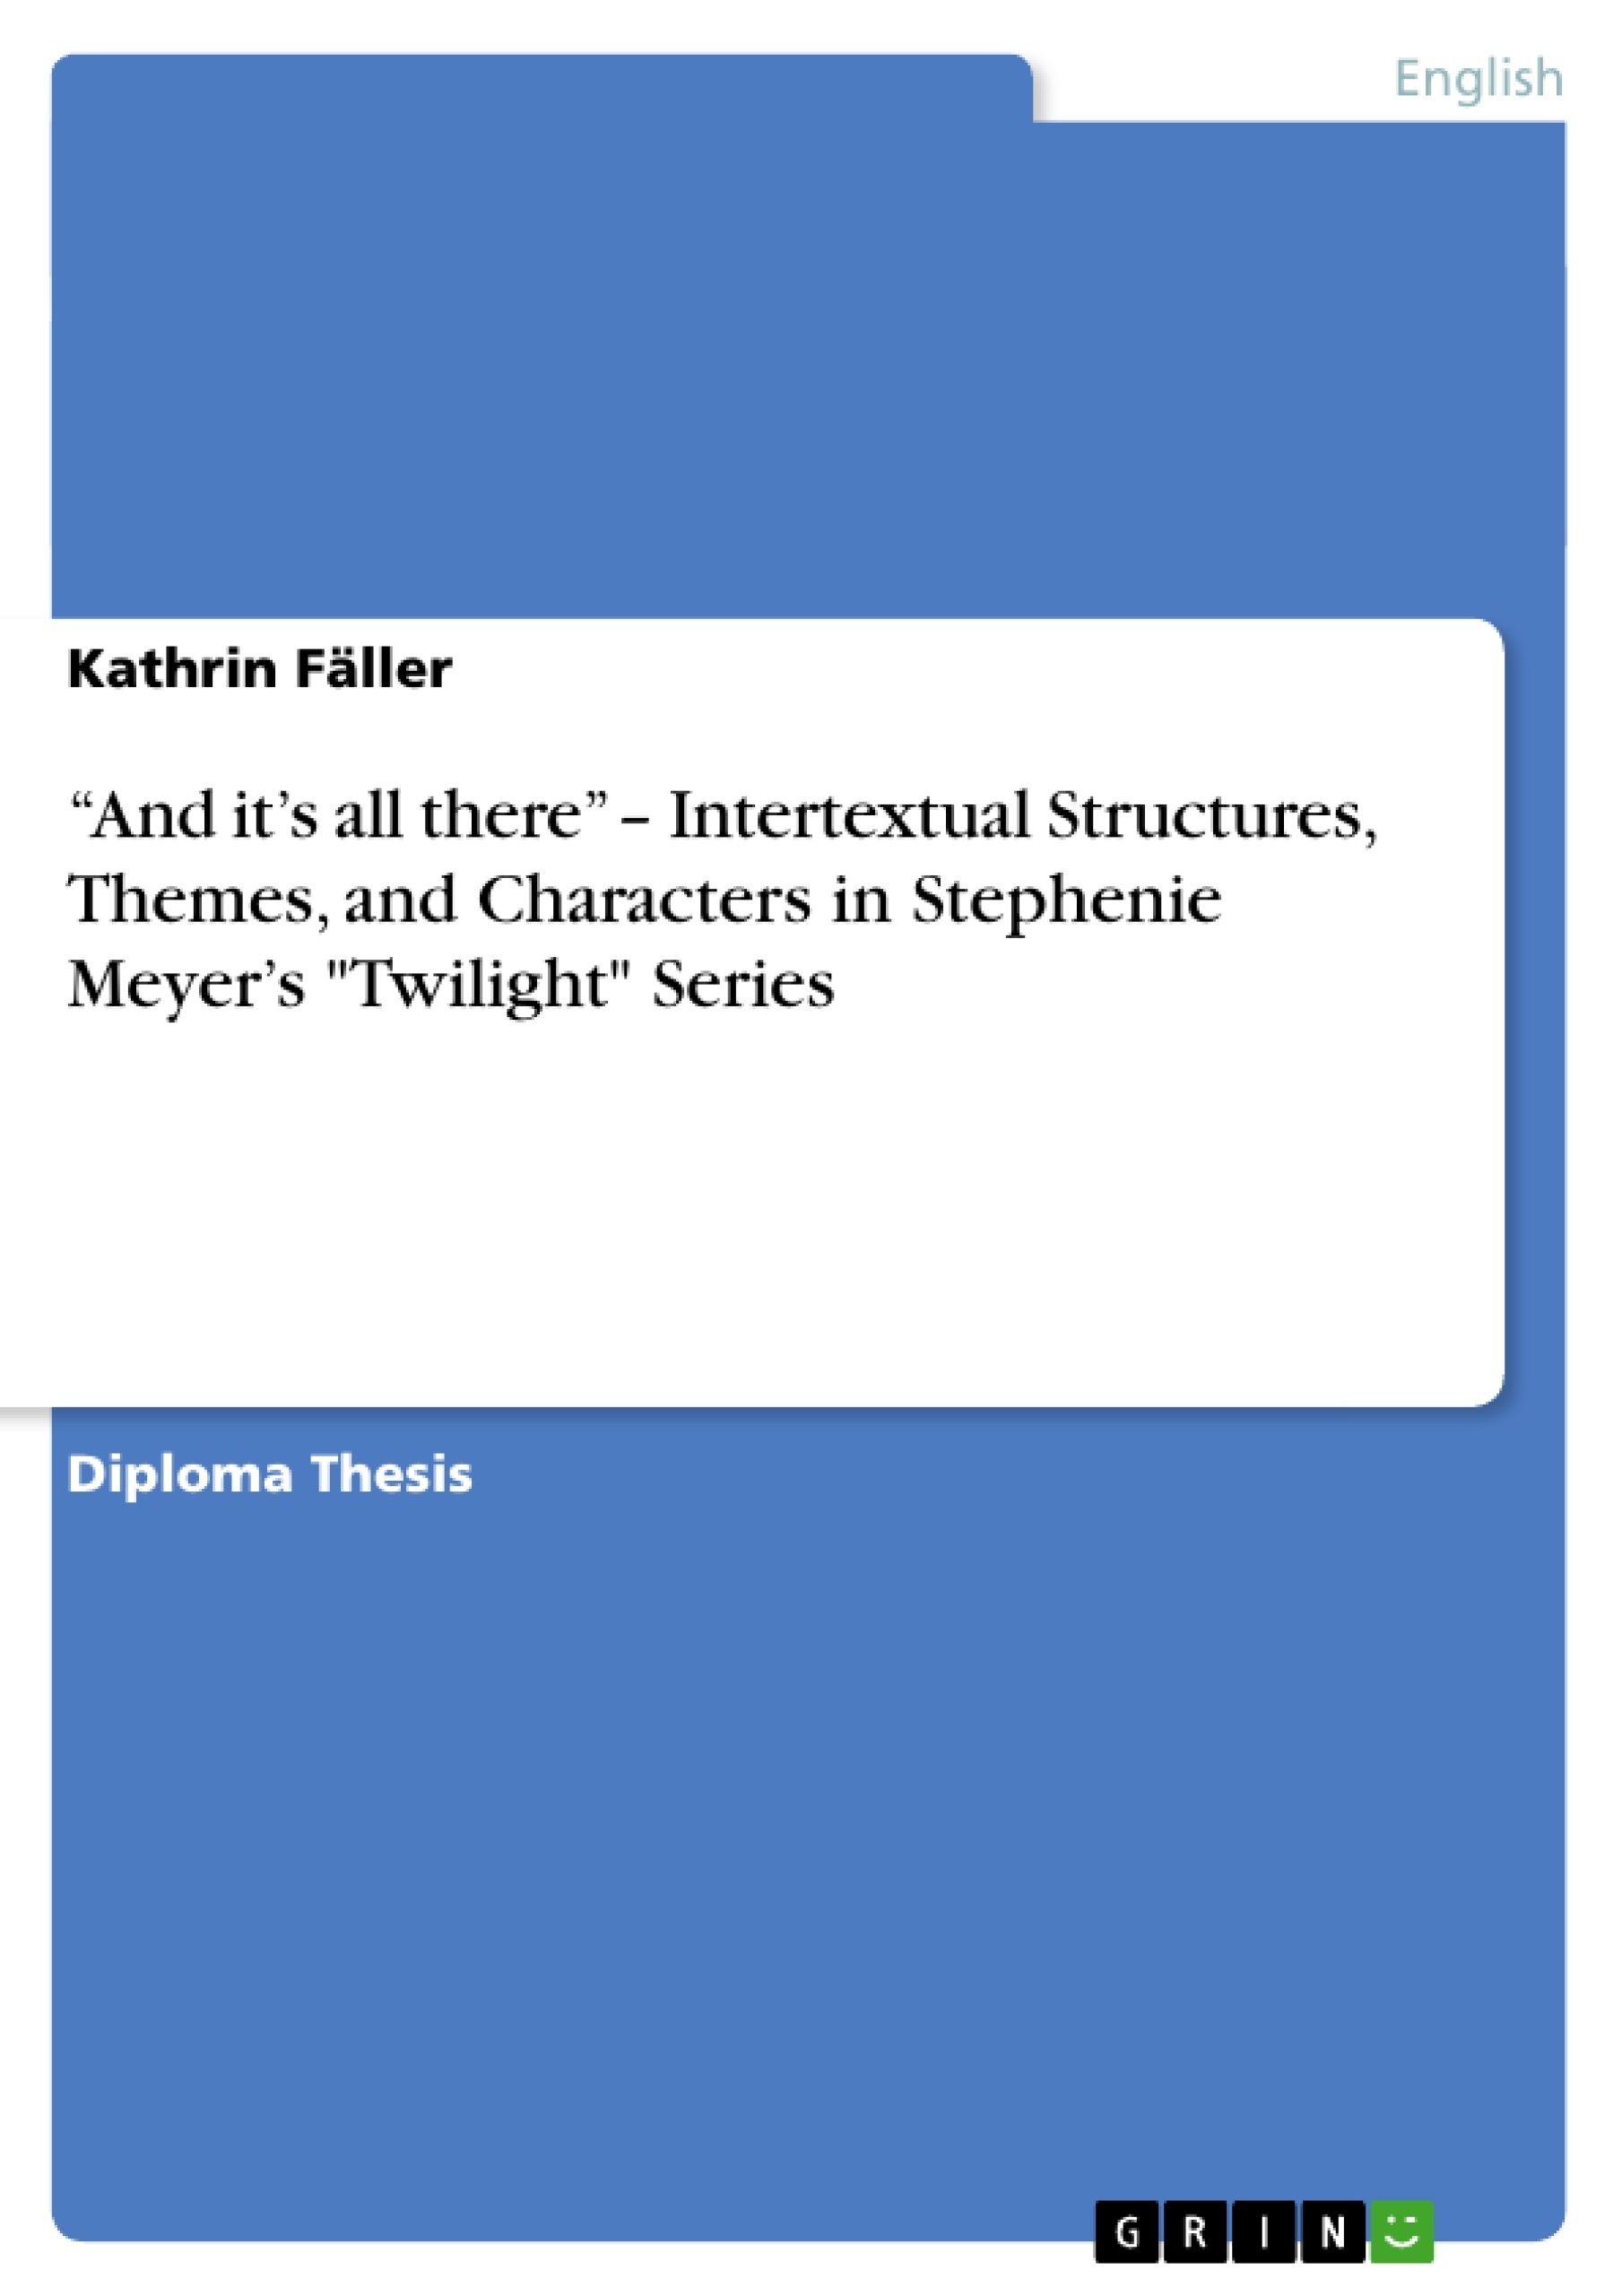 Title: “And it’s all there” – Intertextual Structures, Themes, and Characters in Stephenie Meyer’s "Twilight" Series